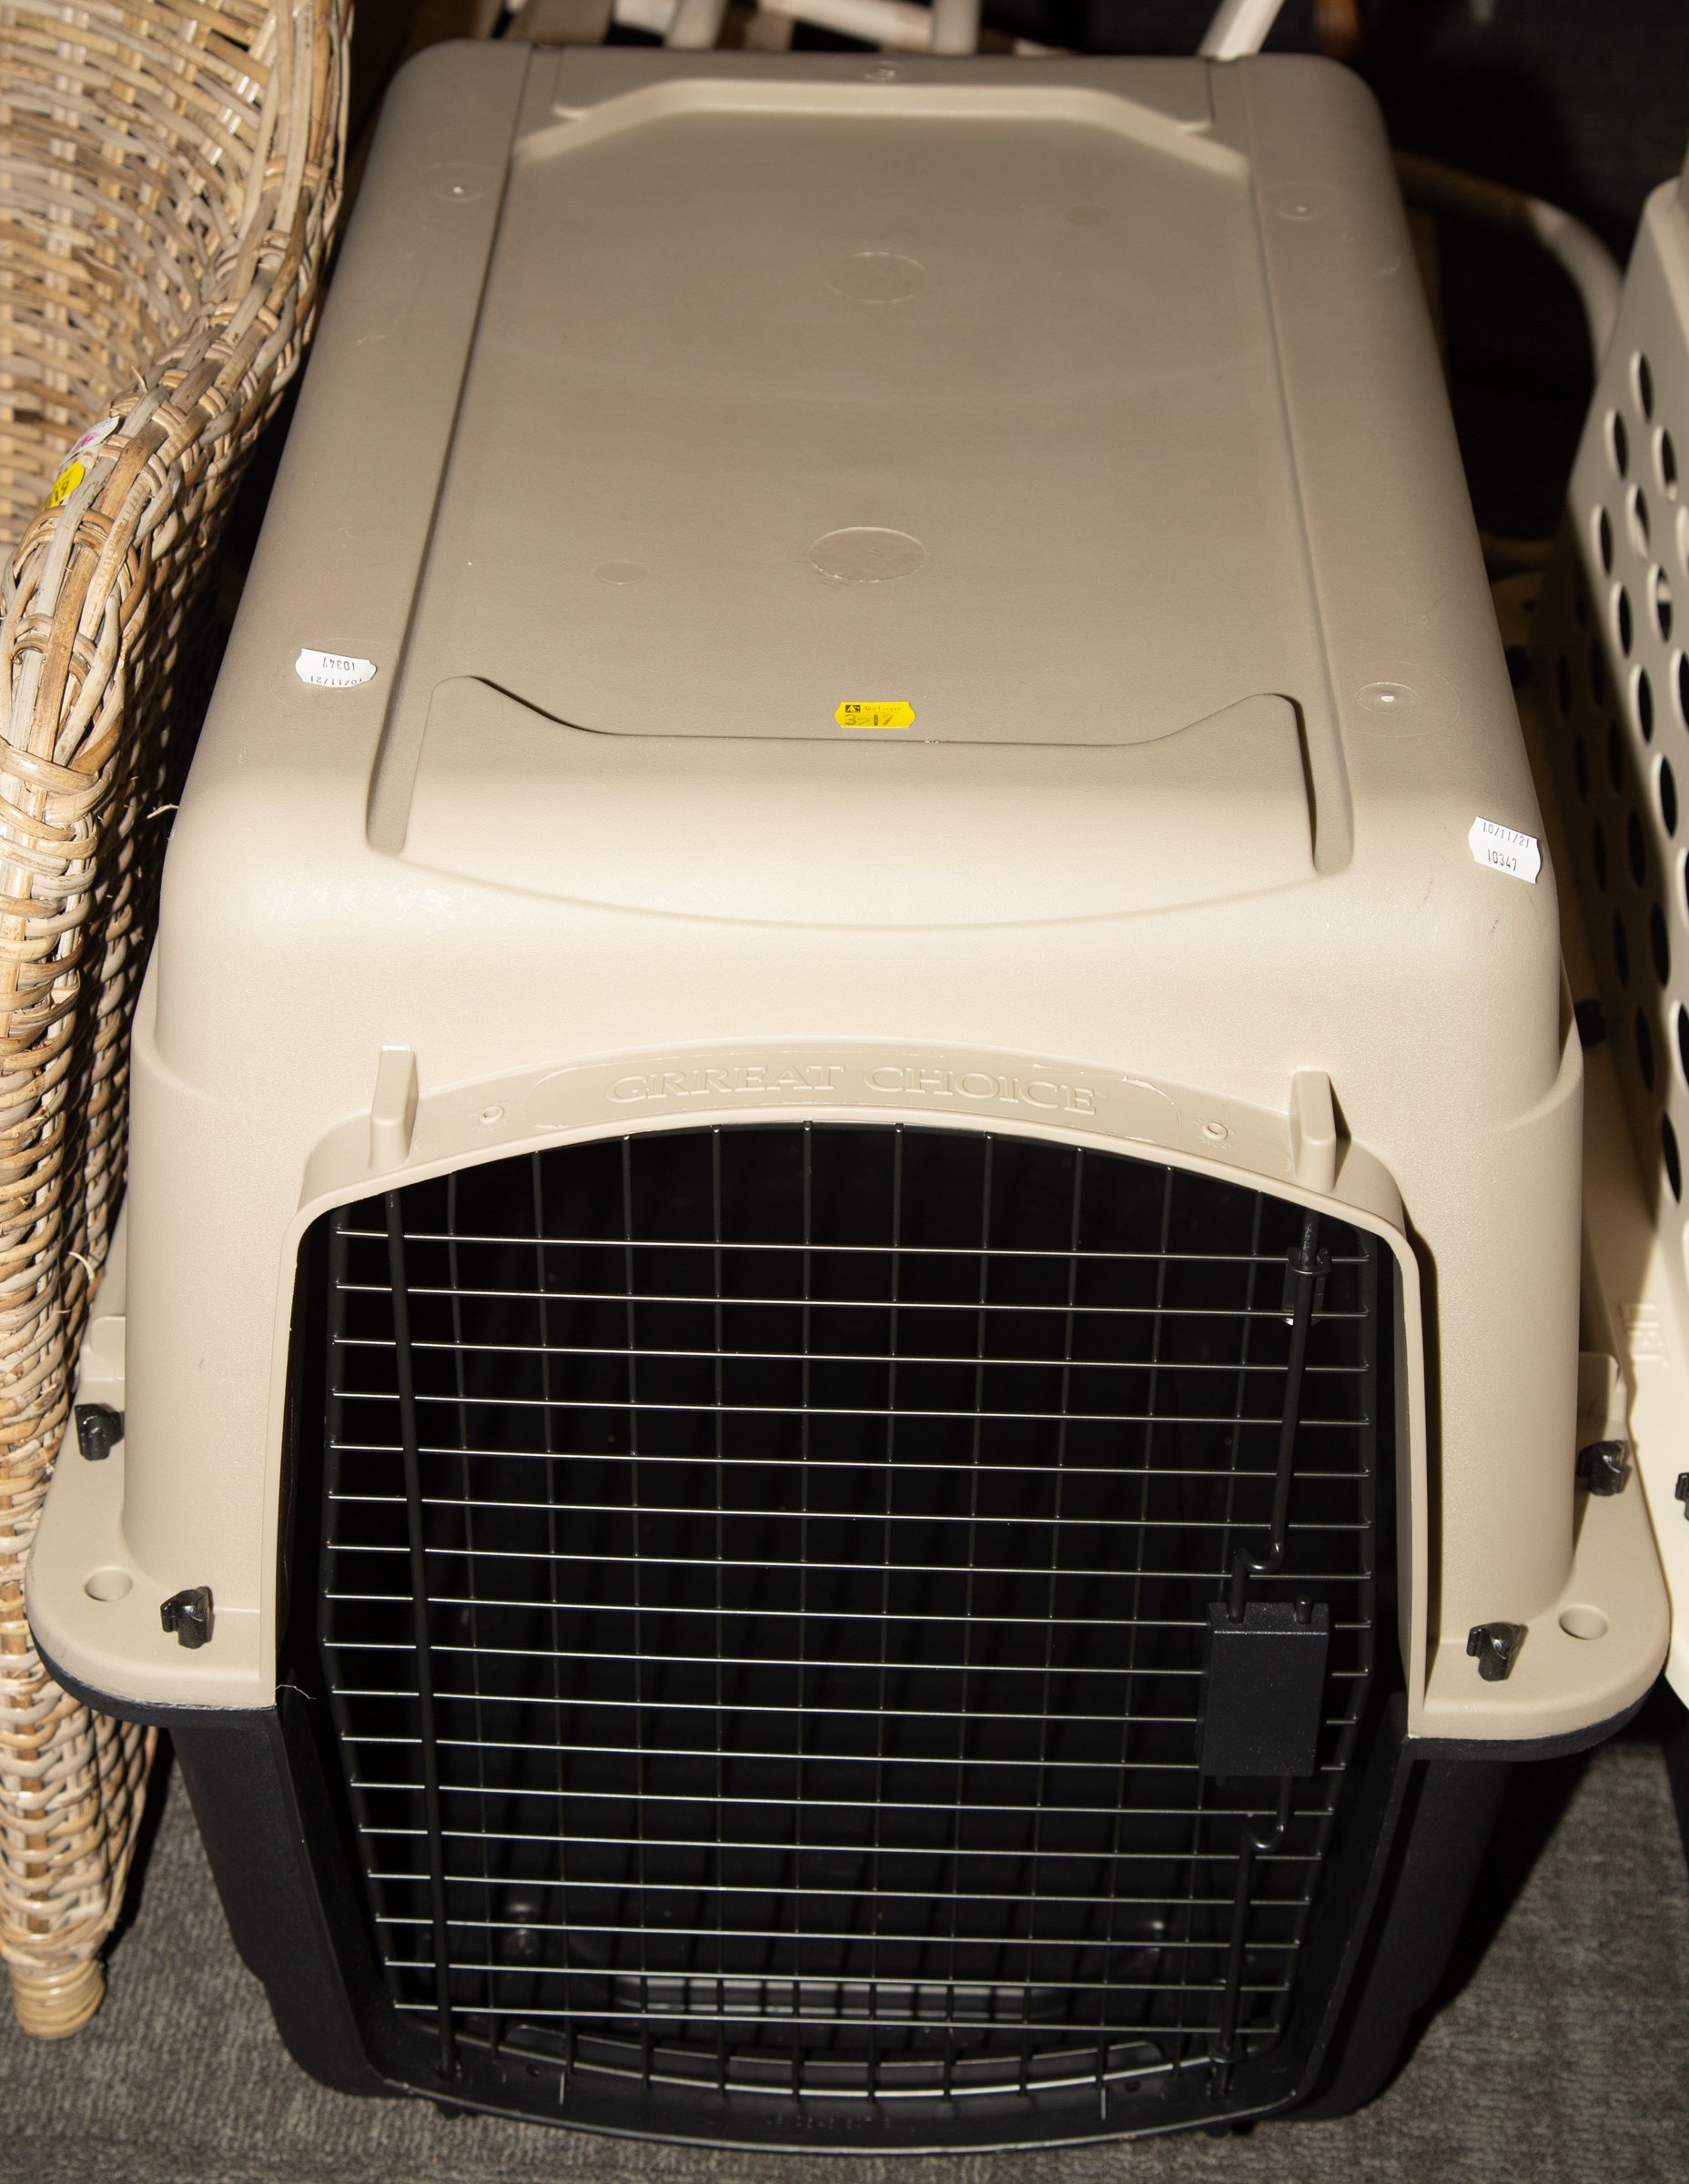 LARGE AIRLINE STYLE DOG CRATE Great